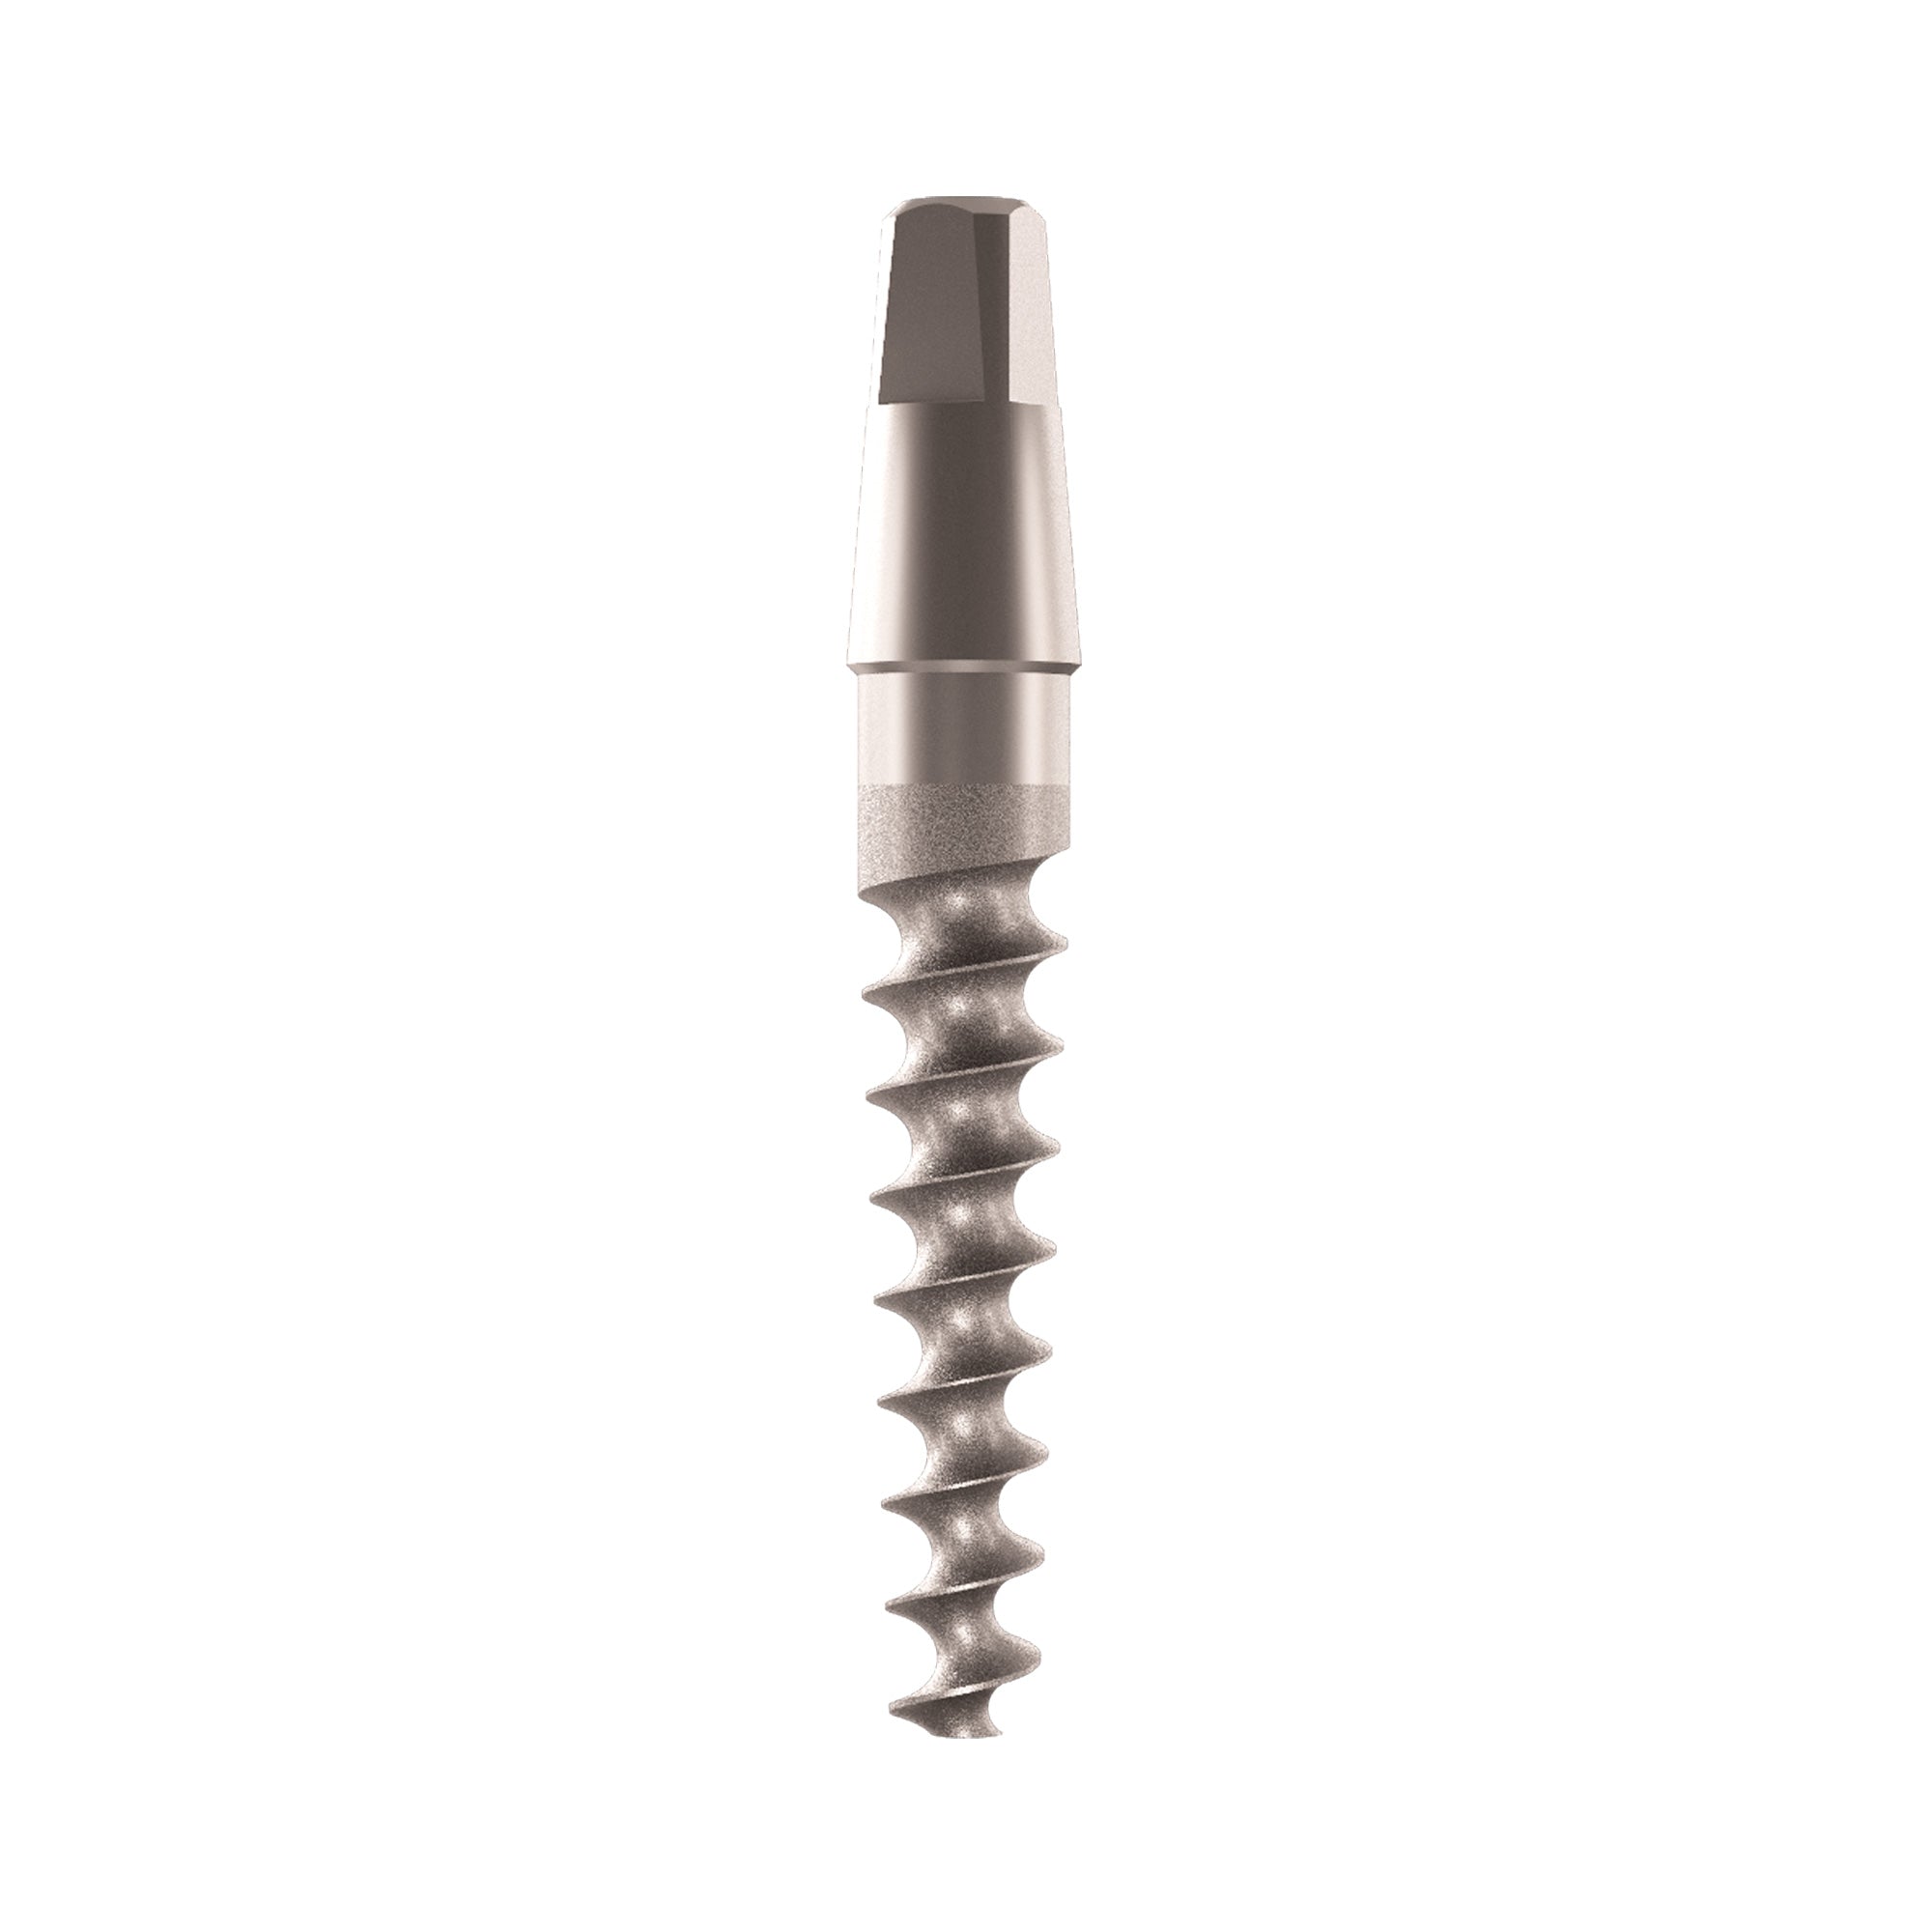 DSI One-Piece Immediate Implant WH - For Narrow Spaces